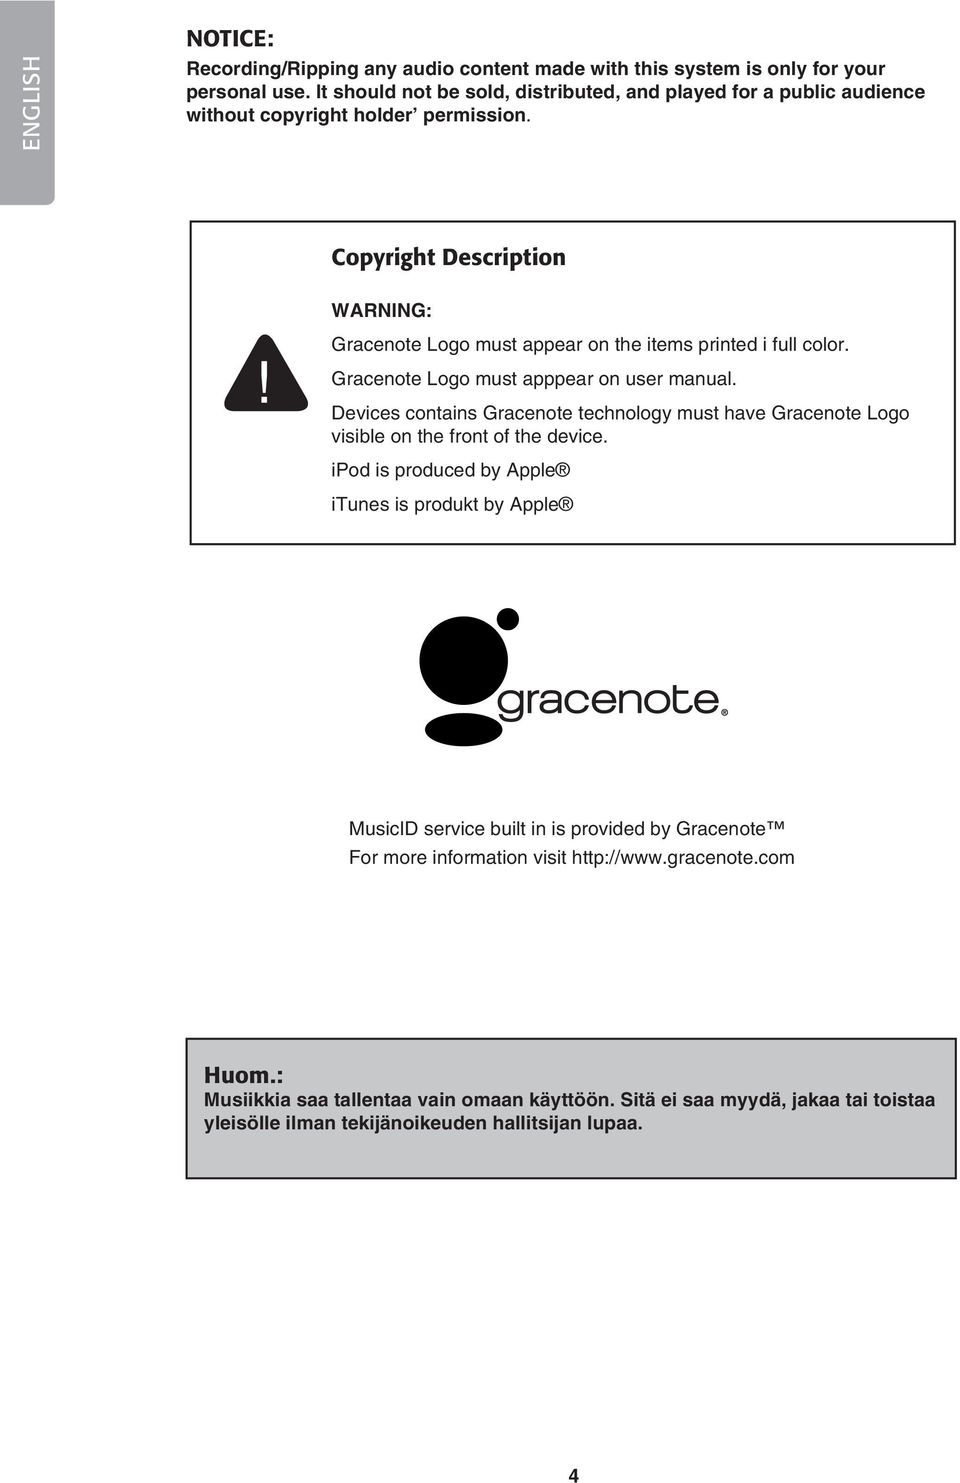 Gracenote Logo must appear on the items printed i full color. Gracenote Logo must apppear on user manual.